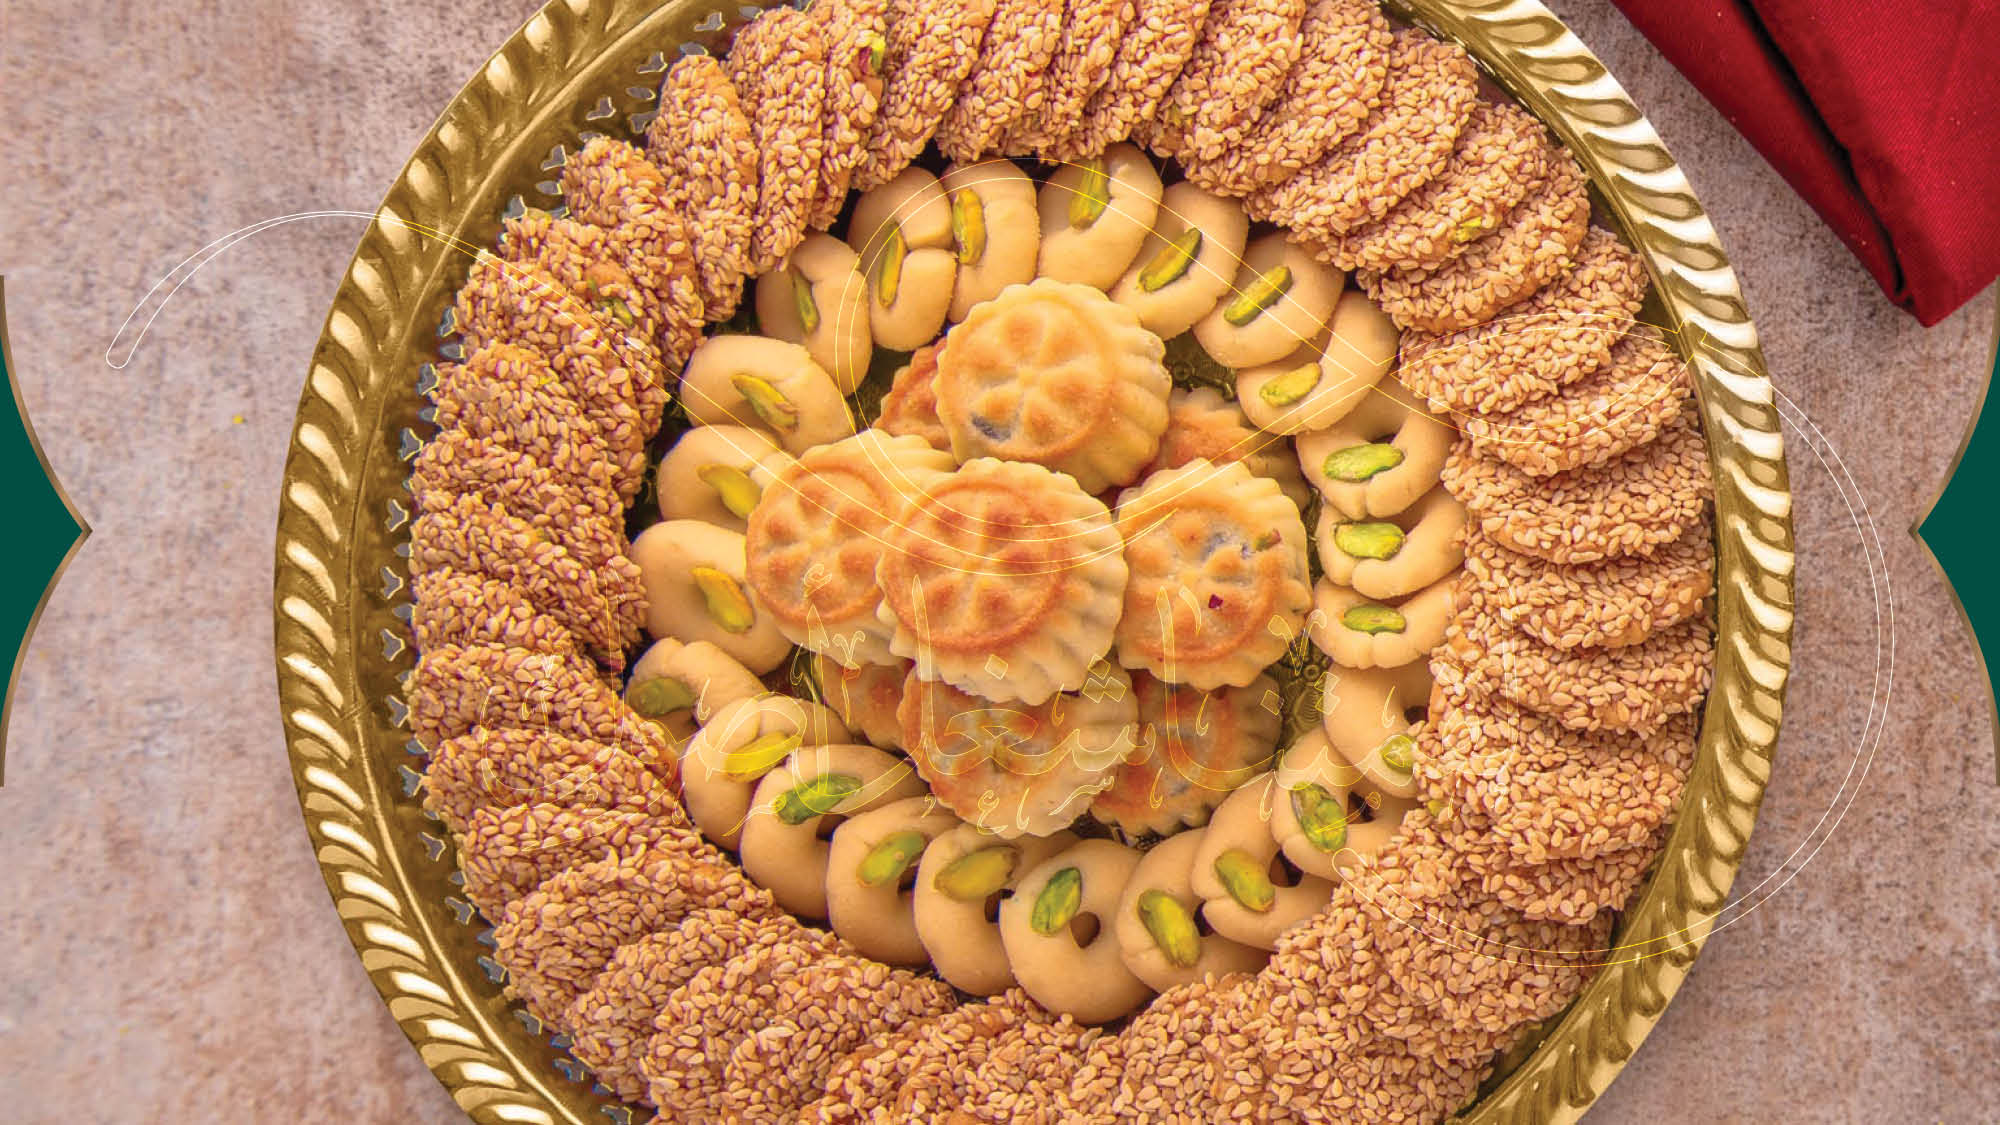 Sweet Discoveries: Explore Our Collection of Arabic Desserts and Sweets